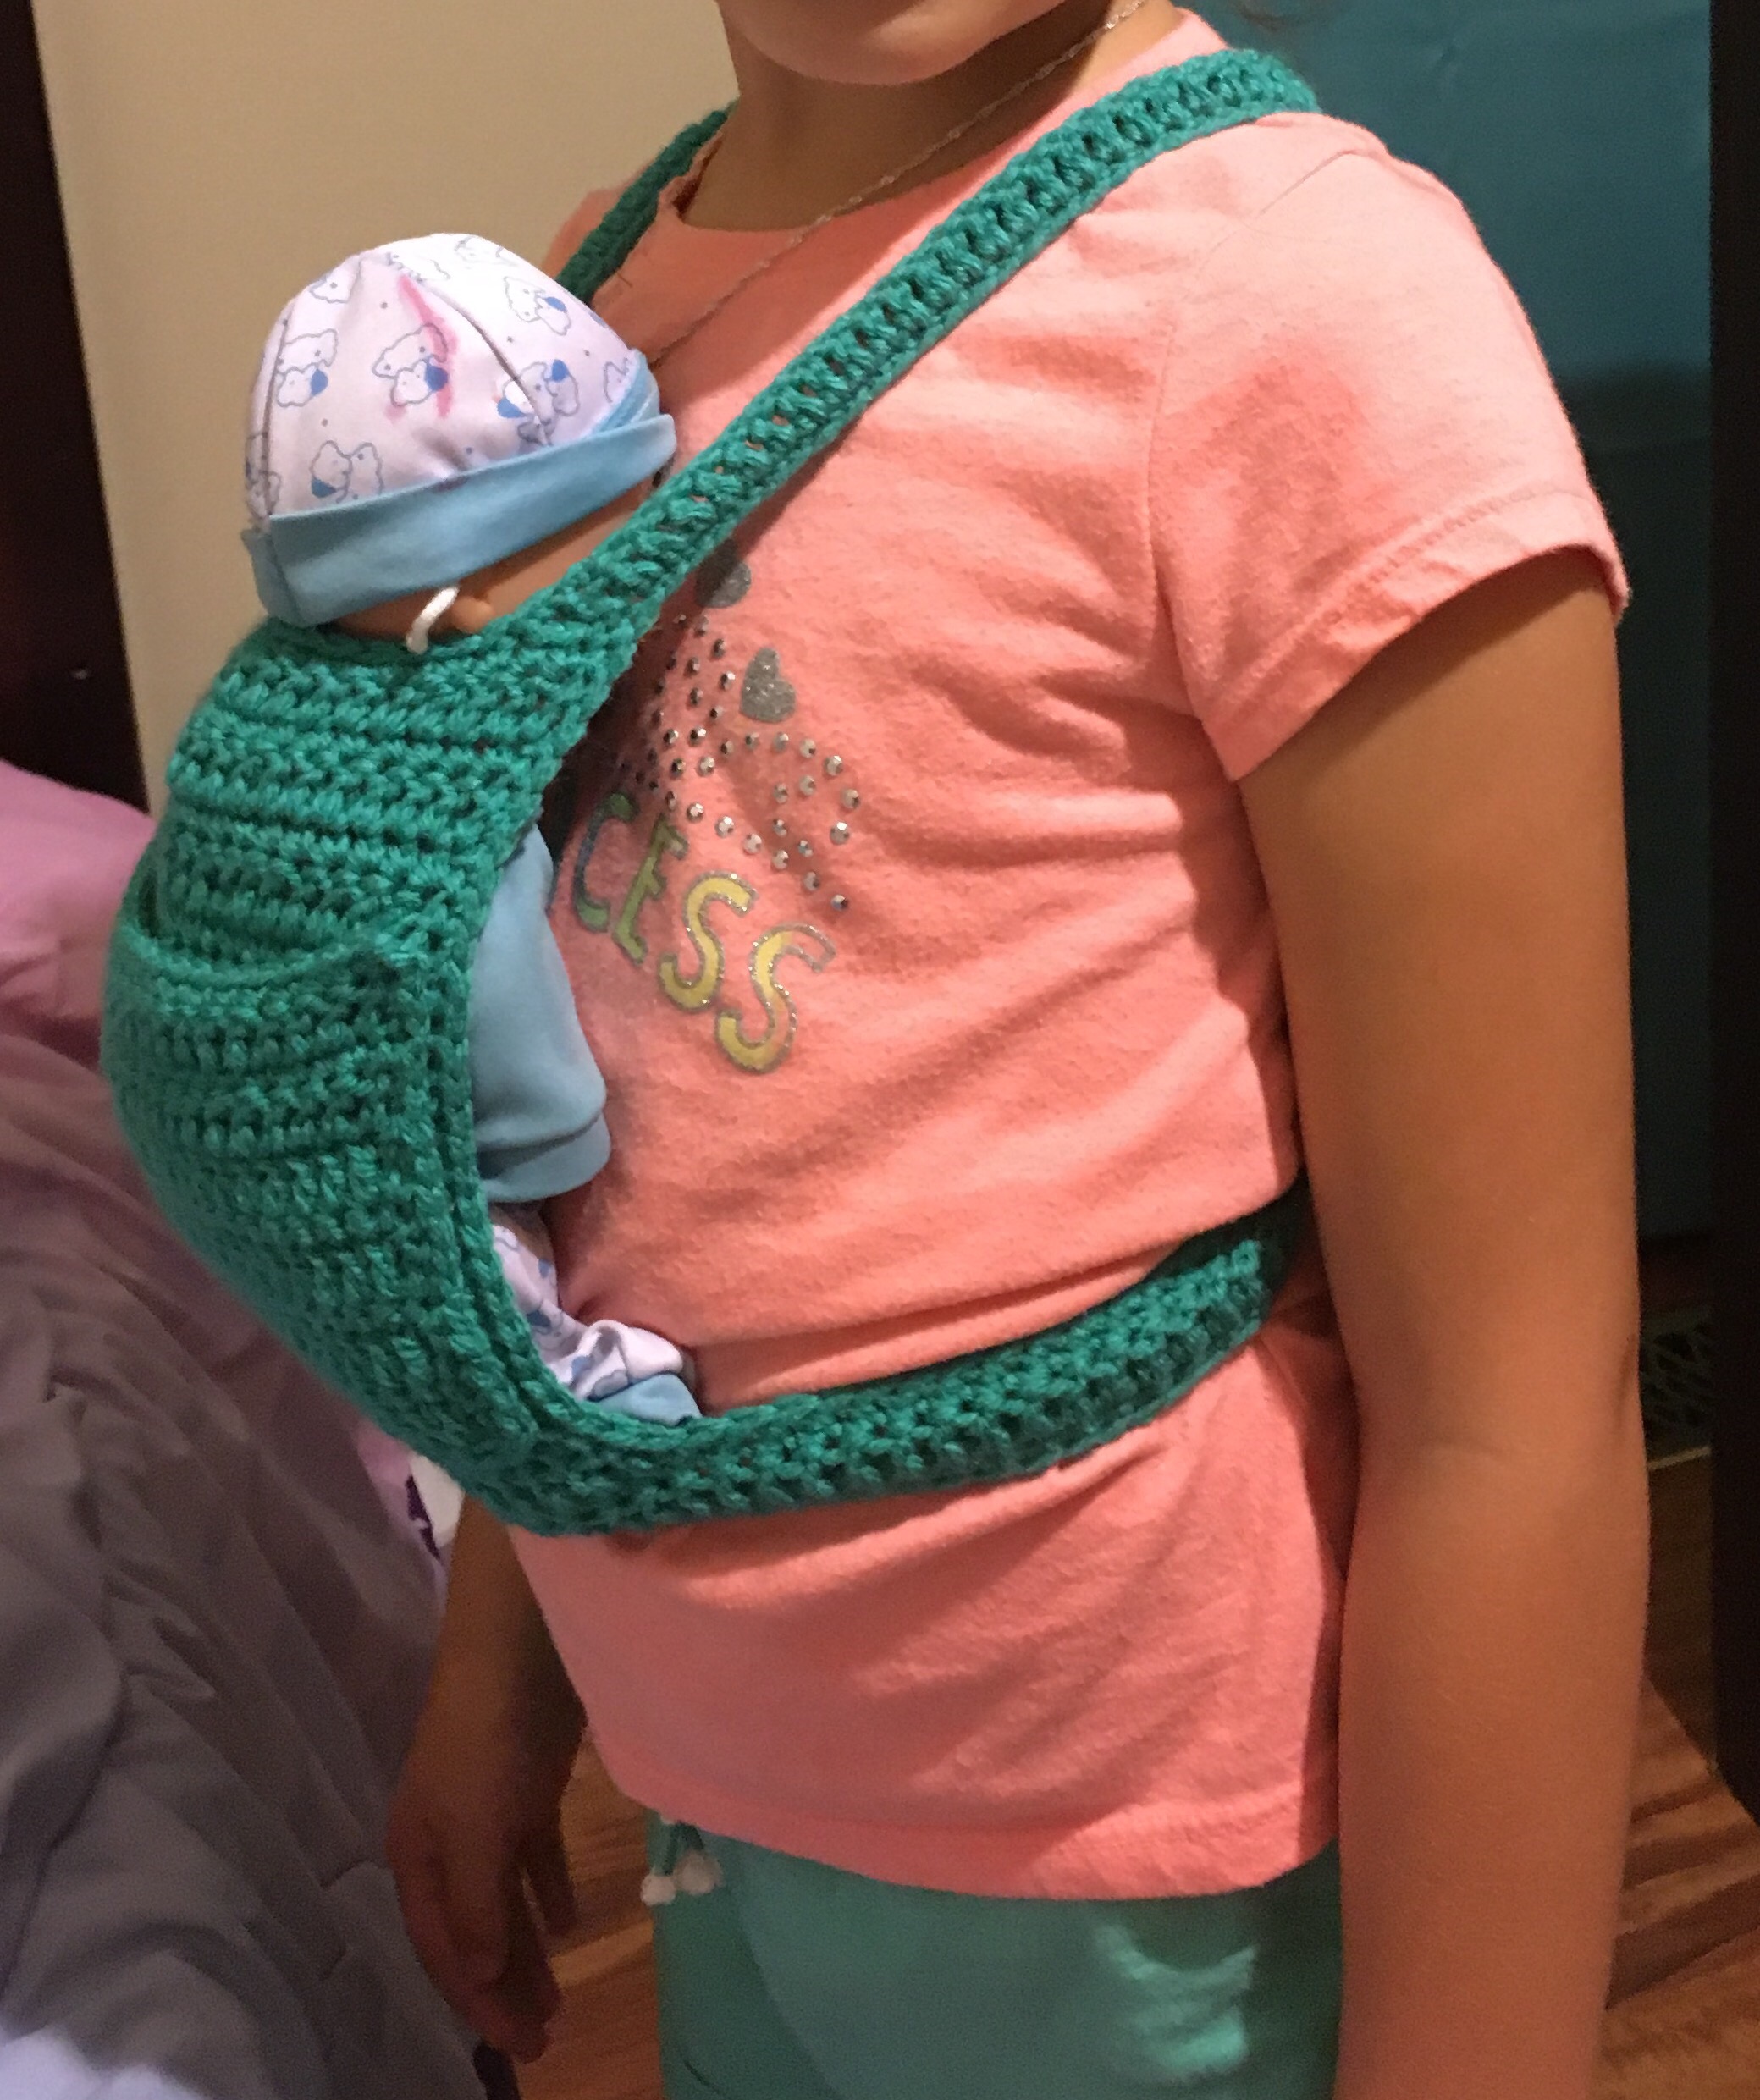 baby doll wrap carrier